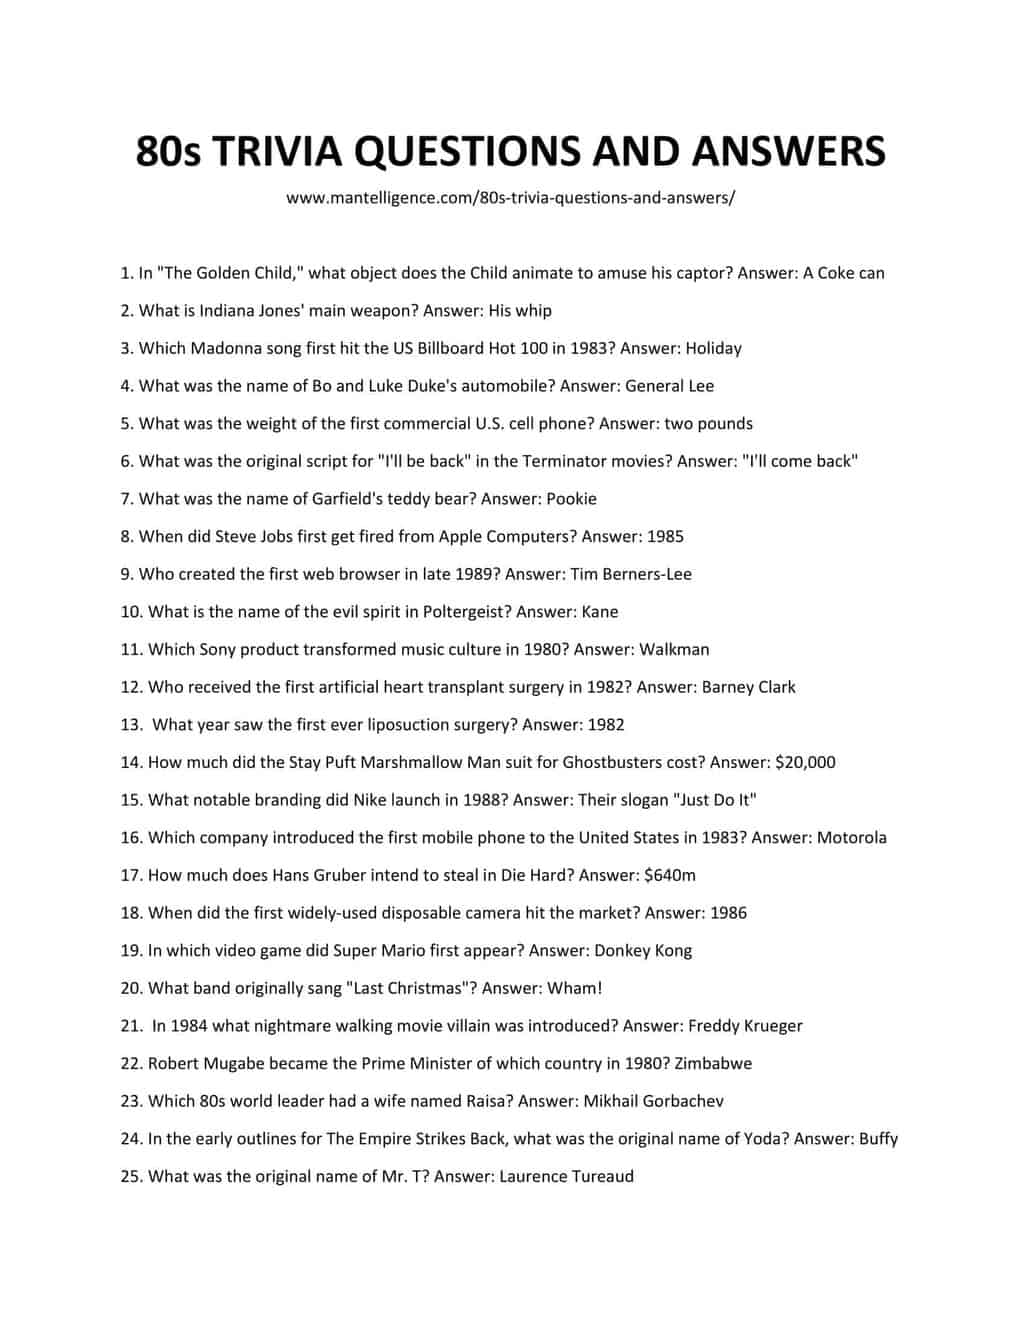 82 Best 80s Trivia Questions And Answers This Is The Only List You Ll Need